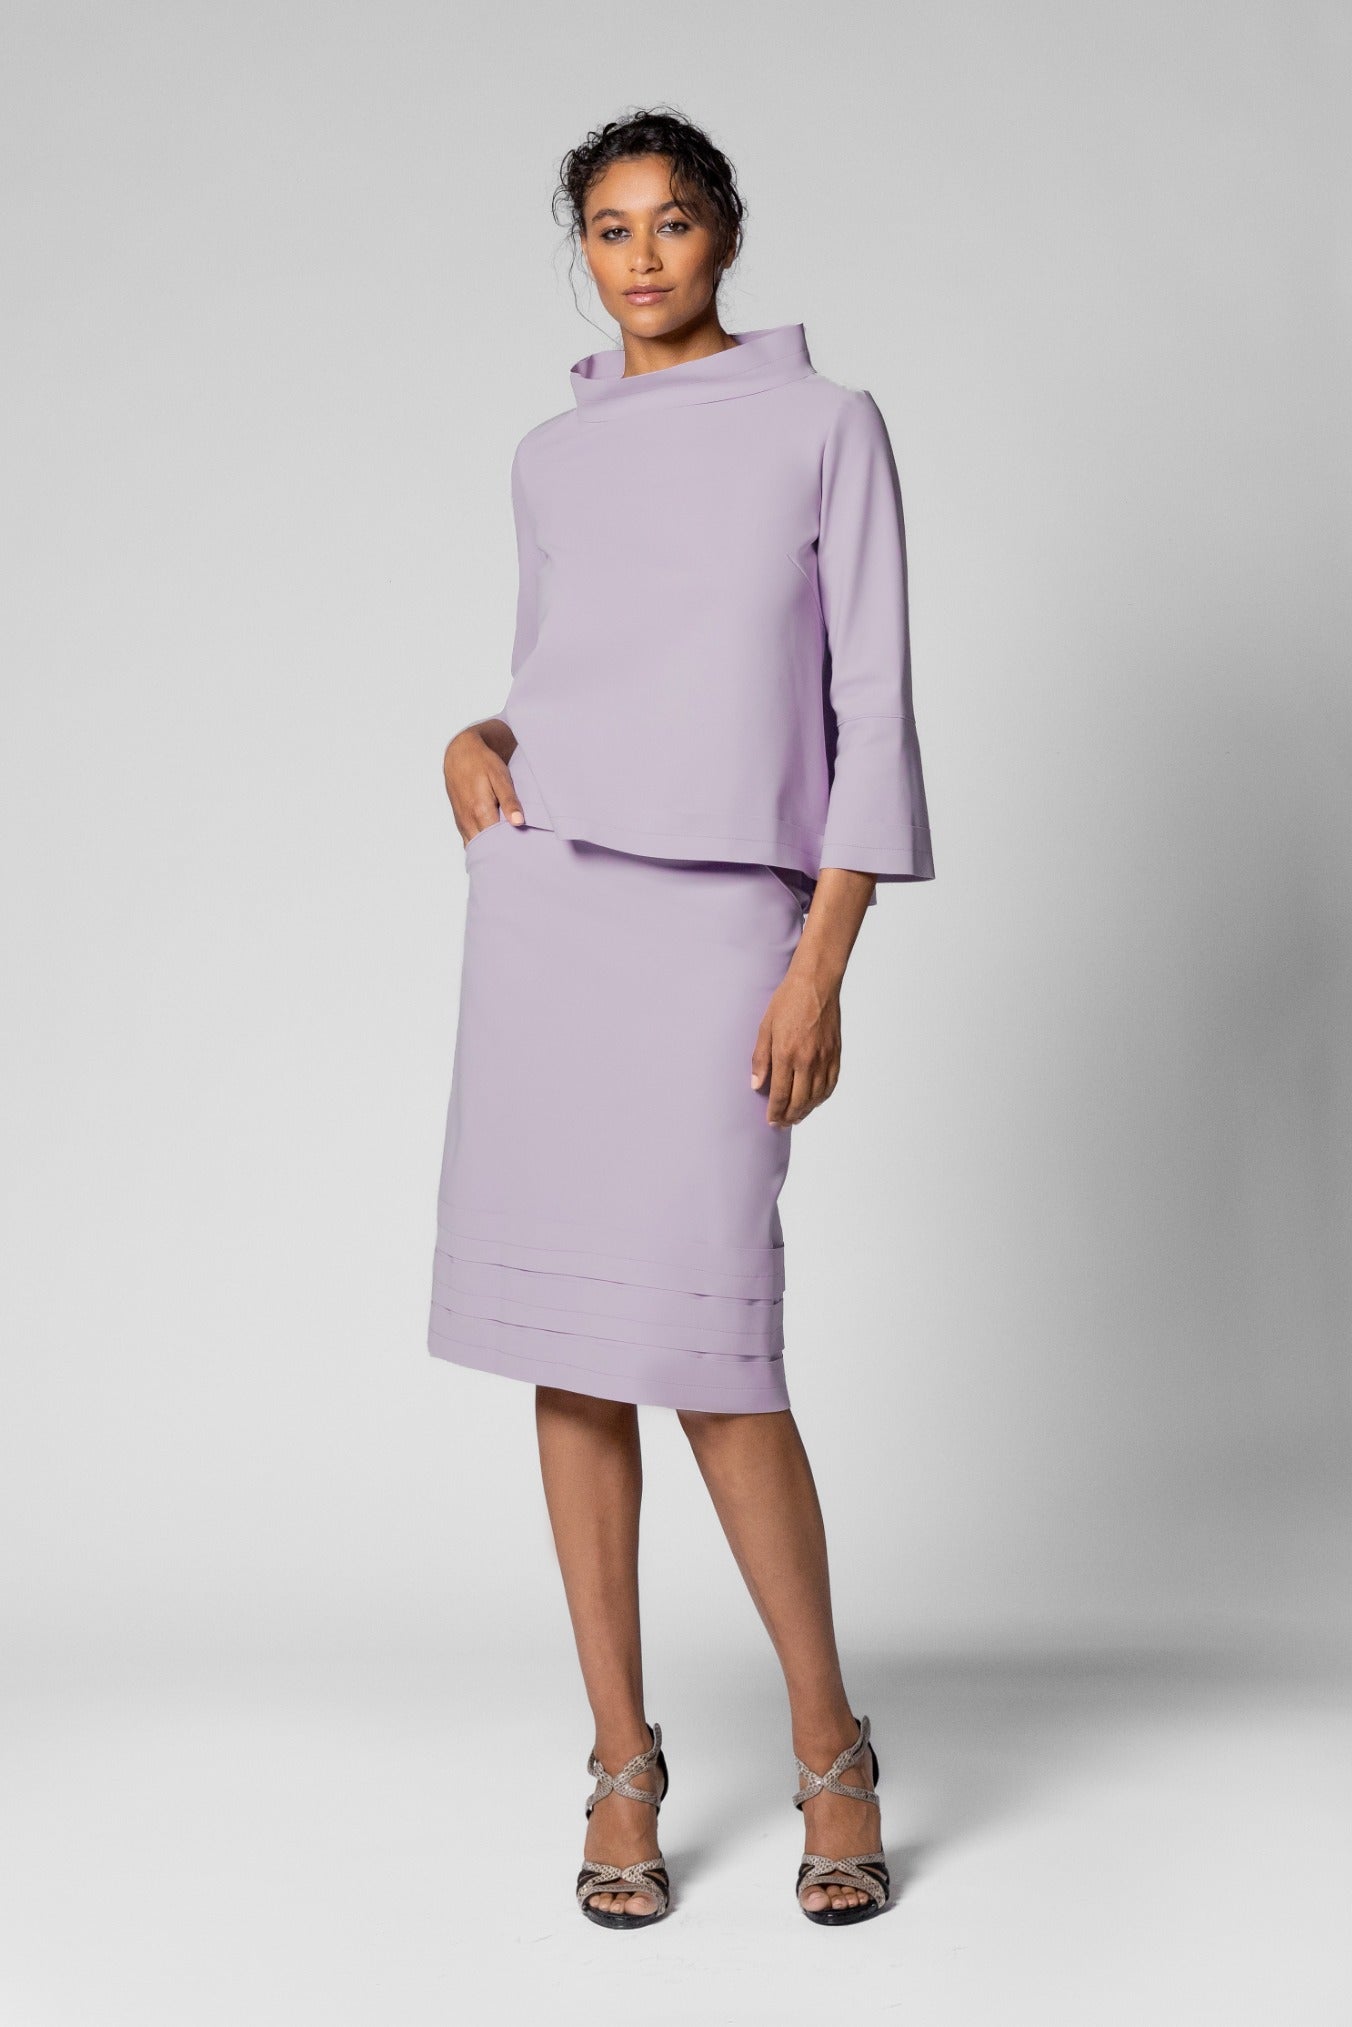 Thea Top - Lilac